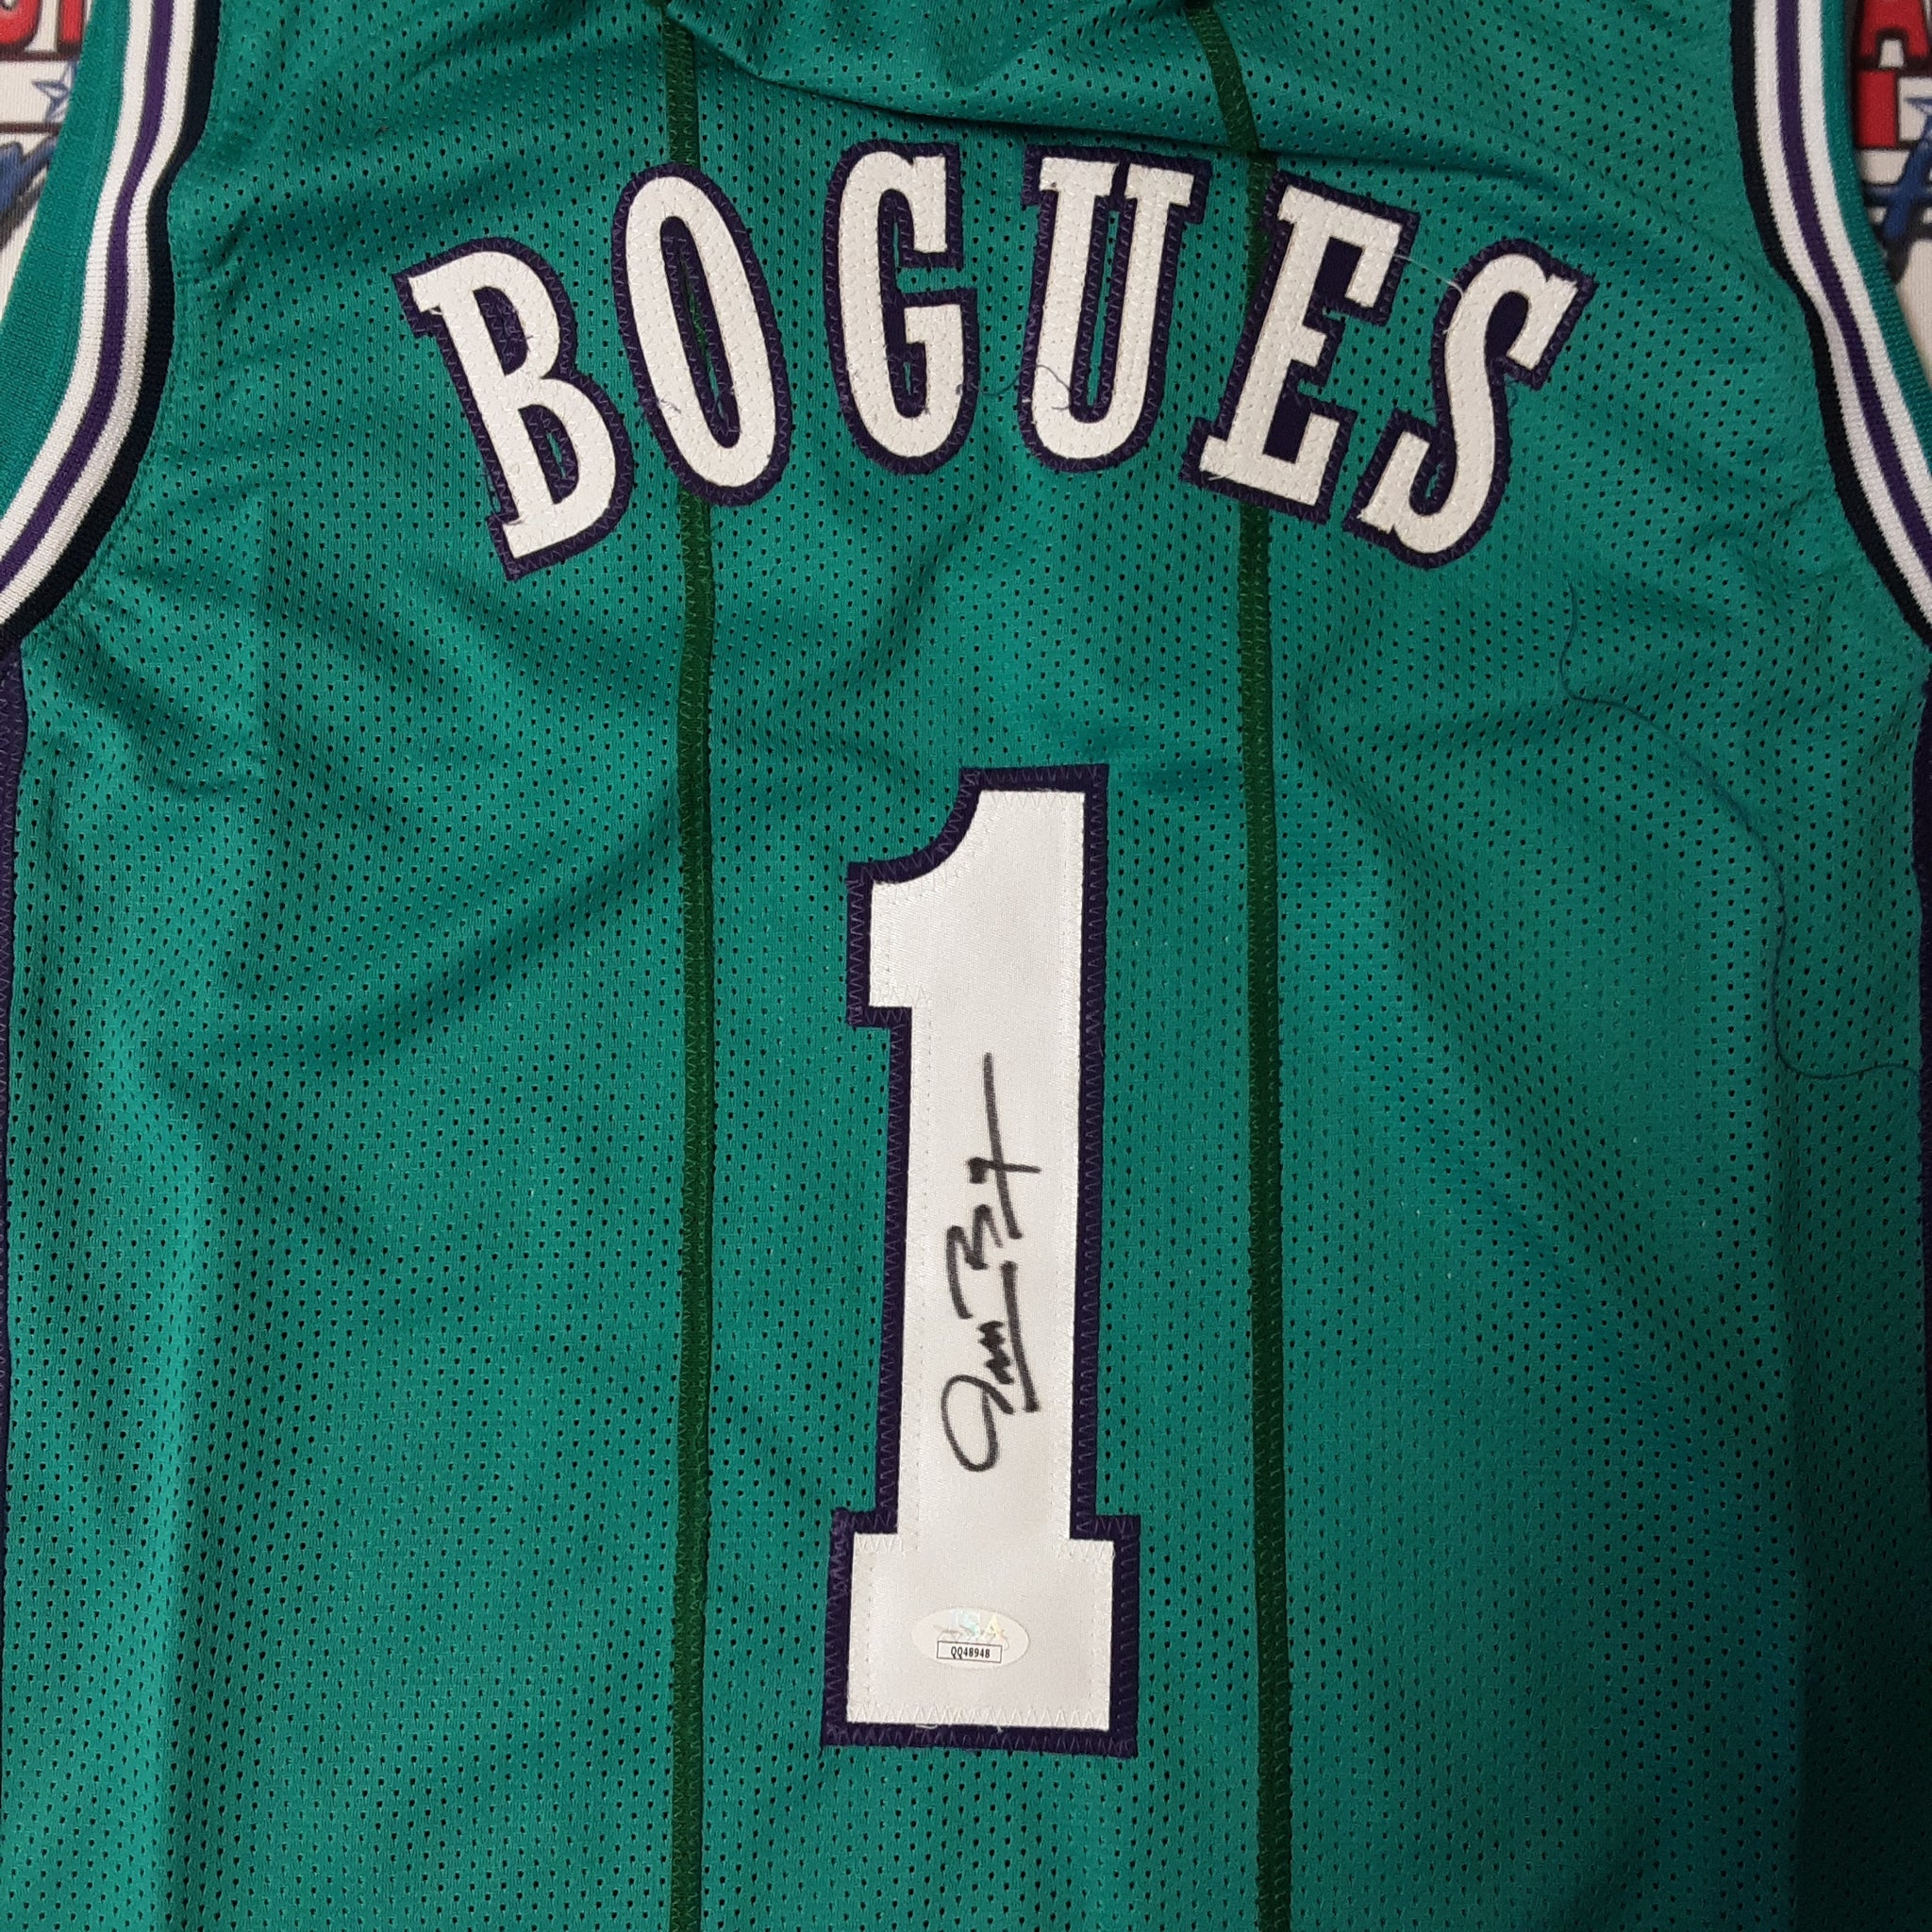 Tyrone Muggsy Bogues Authentic Signed Pro Style Jersey Autographed JSA--